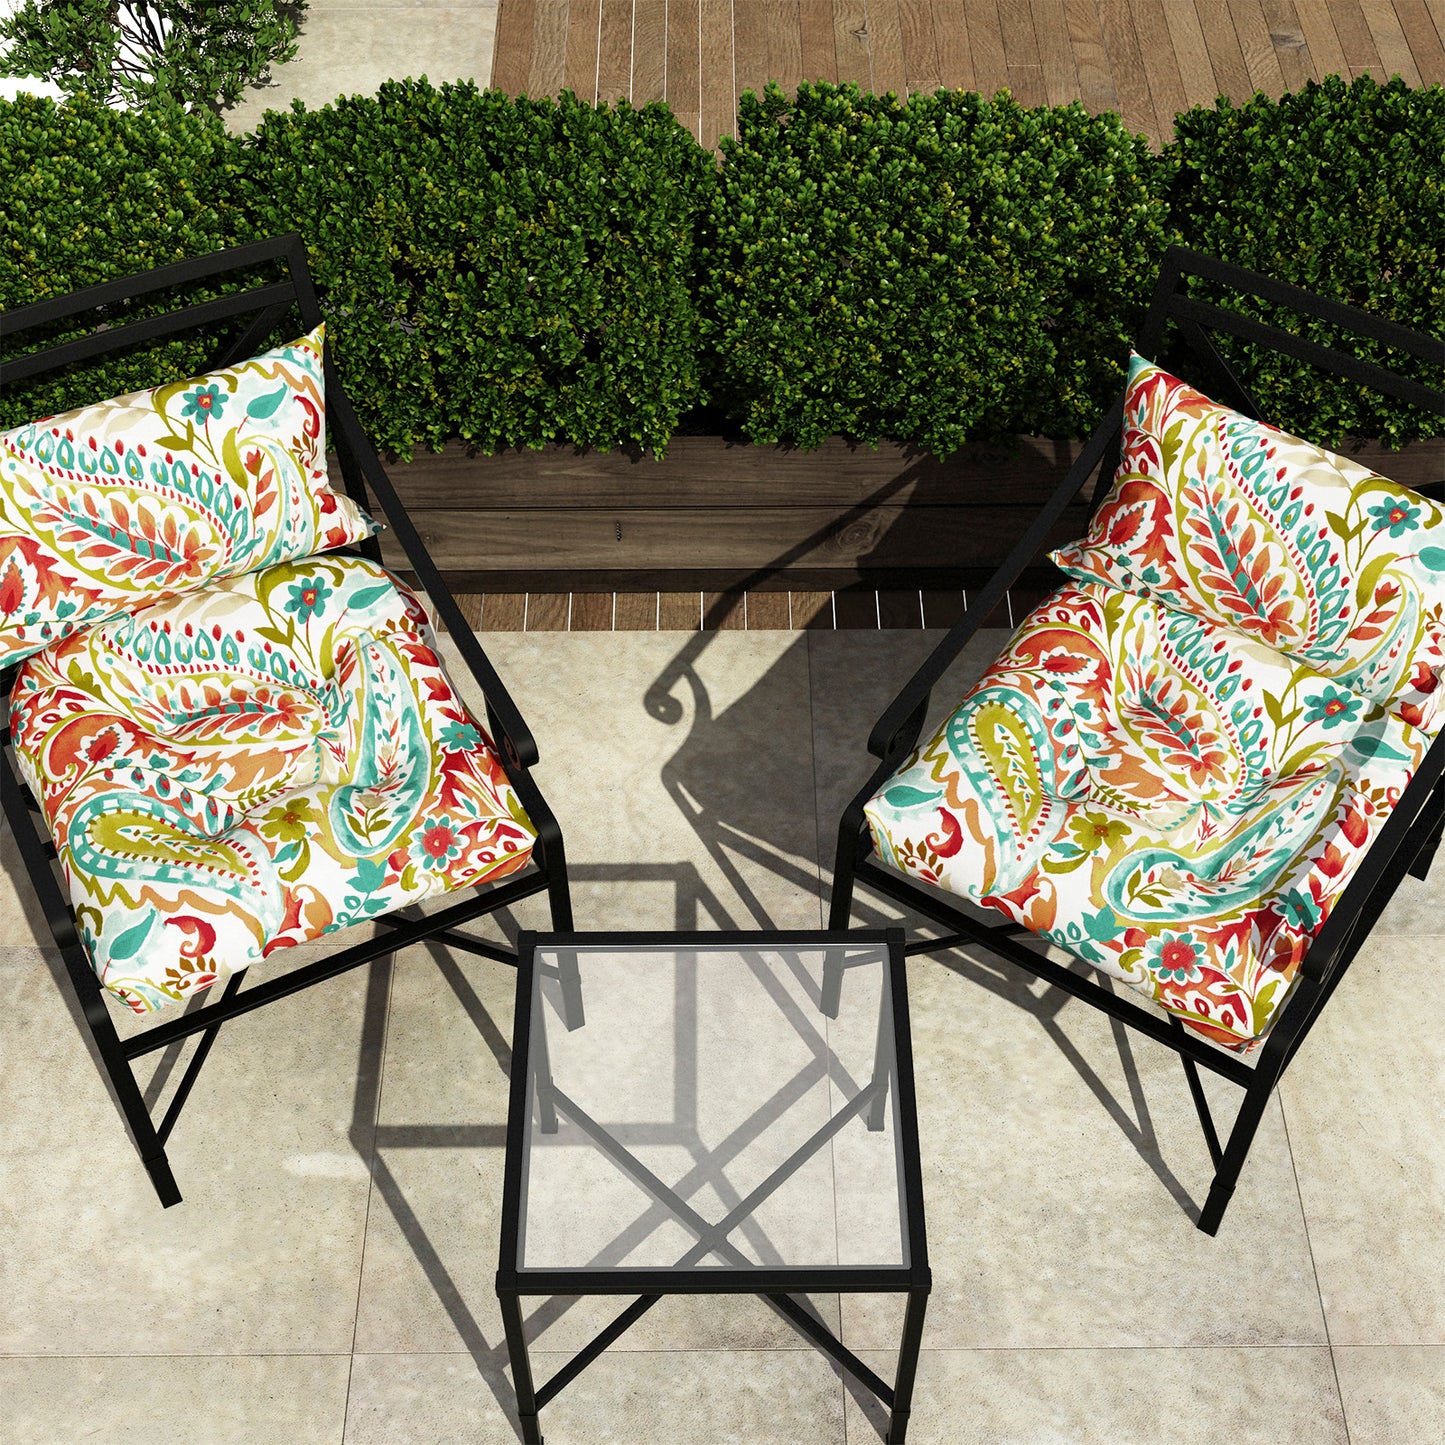 Melody Elephant Patio Wicker Chair Cushions, All Weather Outdoor Tufted Chair Pads Pack of 2, 19 x 19 x 5 Inch U-Shaped Seat Cushions of Garden Furniture Decoration, Pretty Paisley